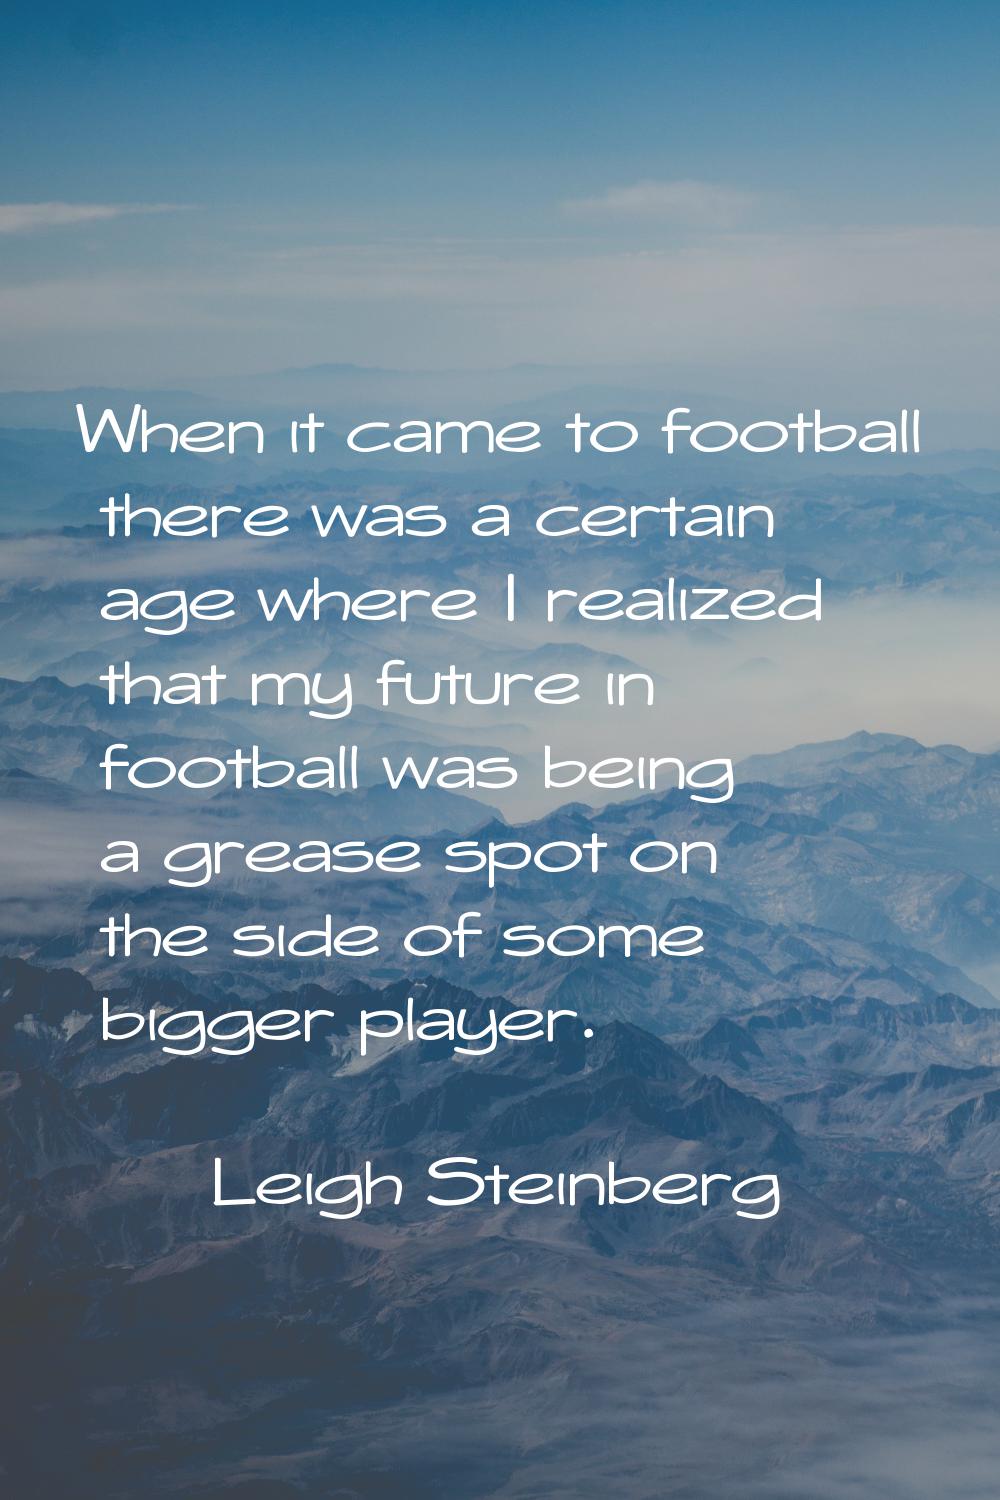 When it came to football there was a certain age where I realized that my future in football was be